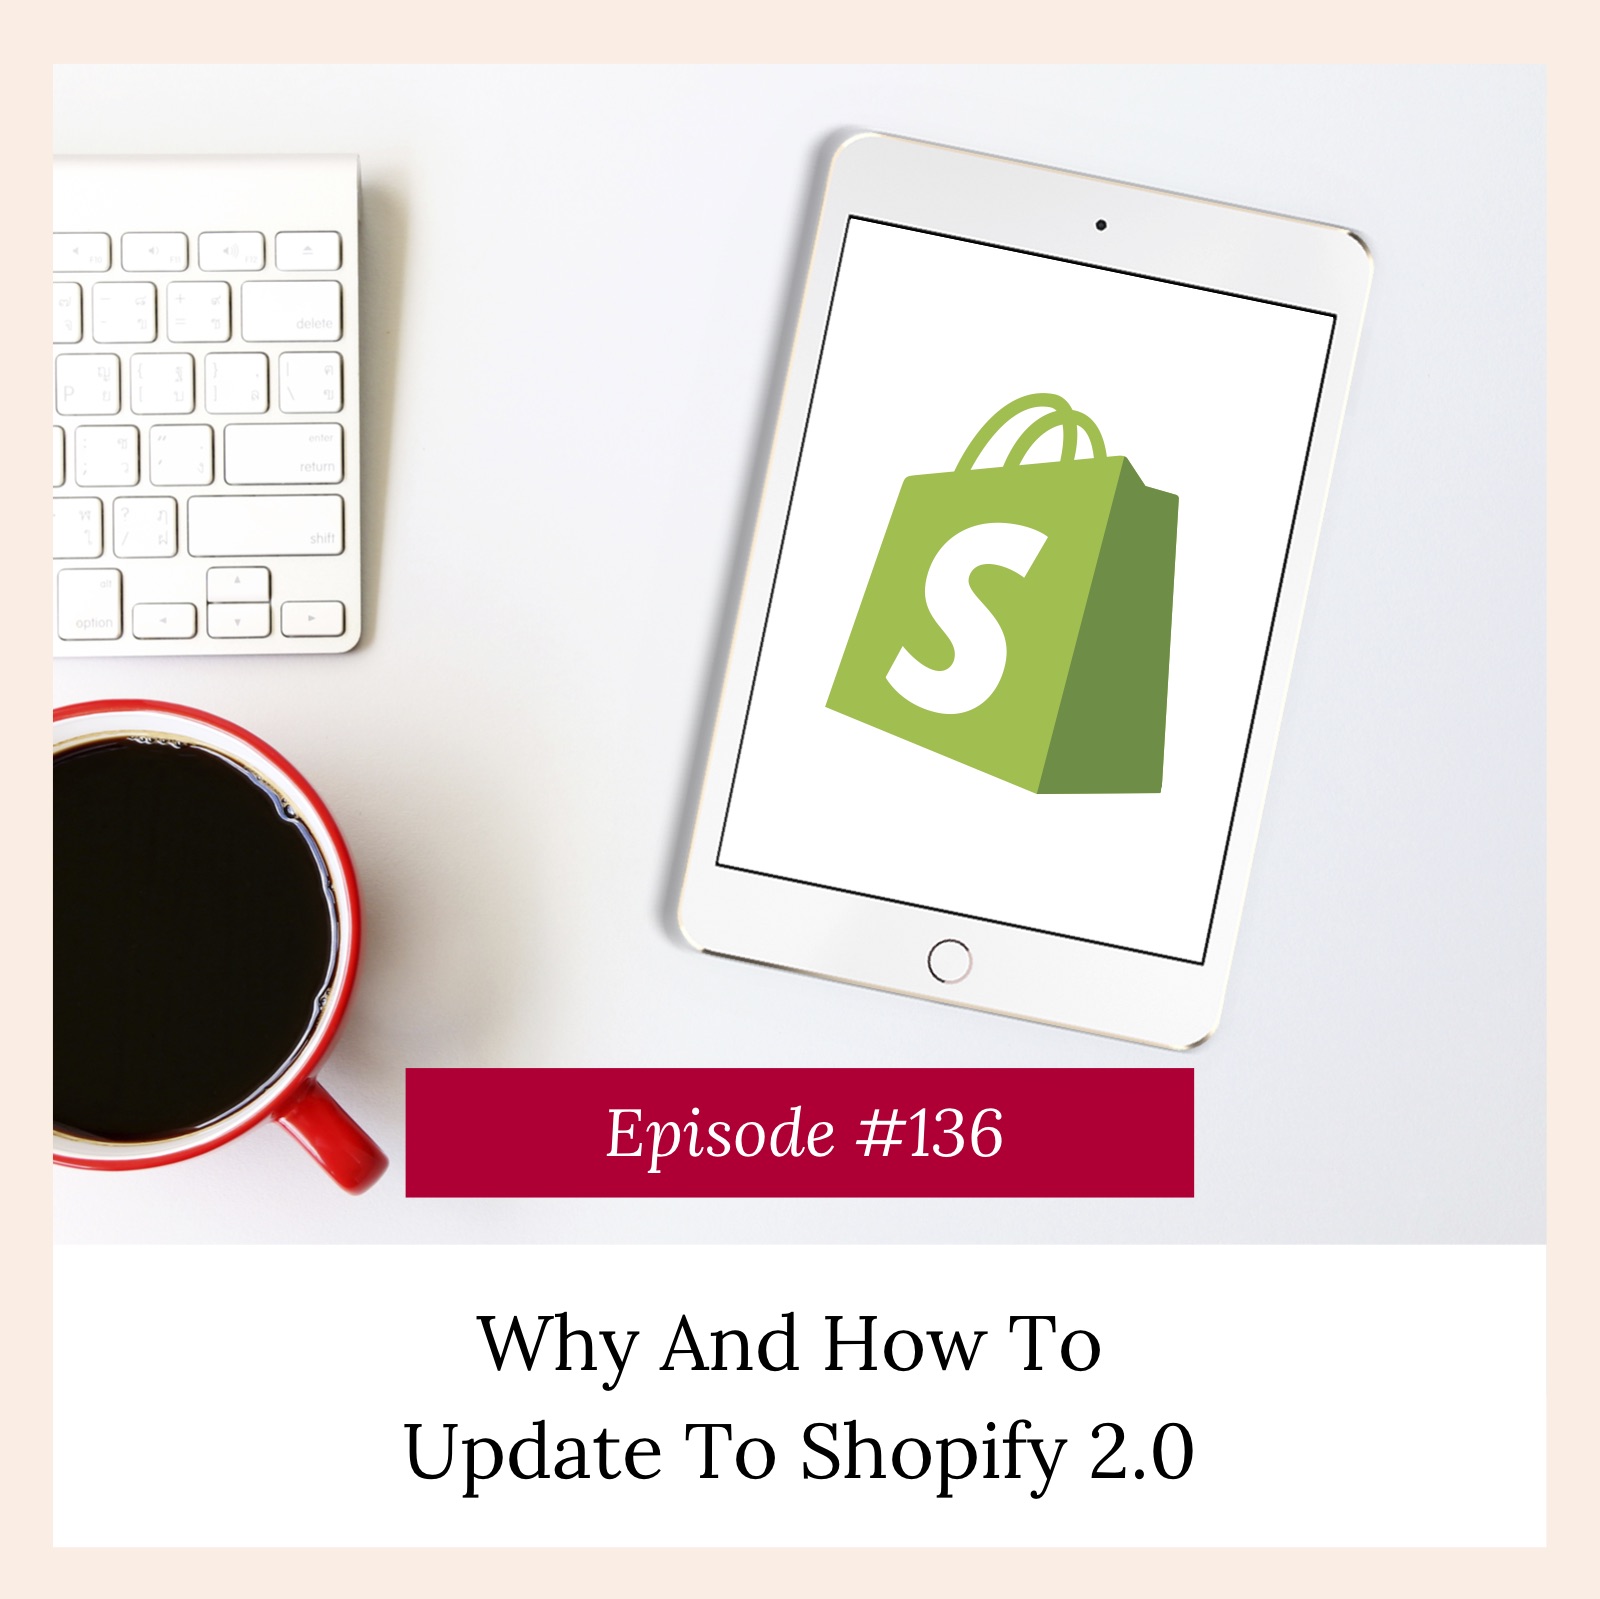 Why and How To Update to Shopify 2.0